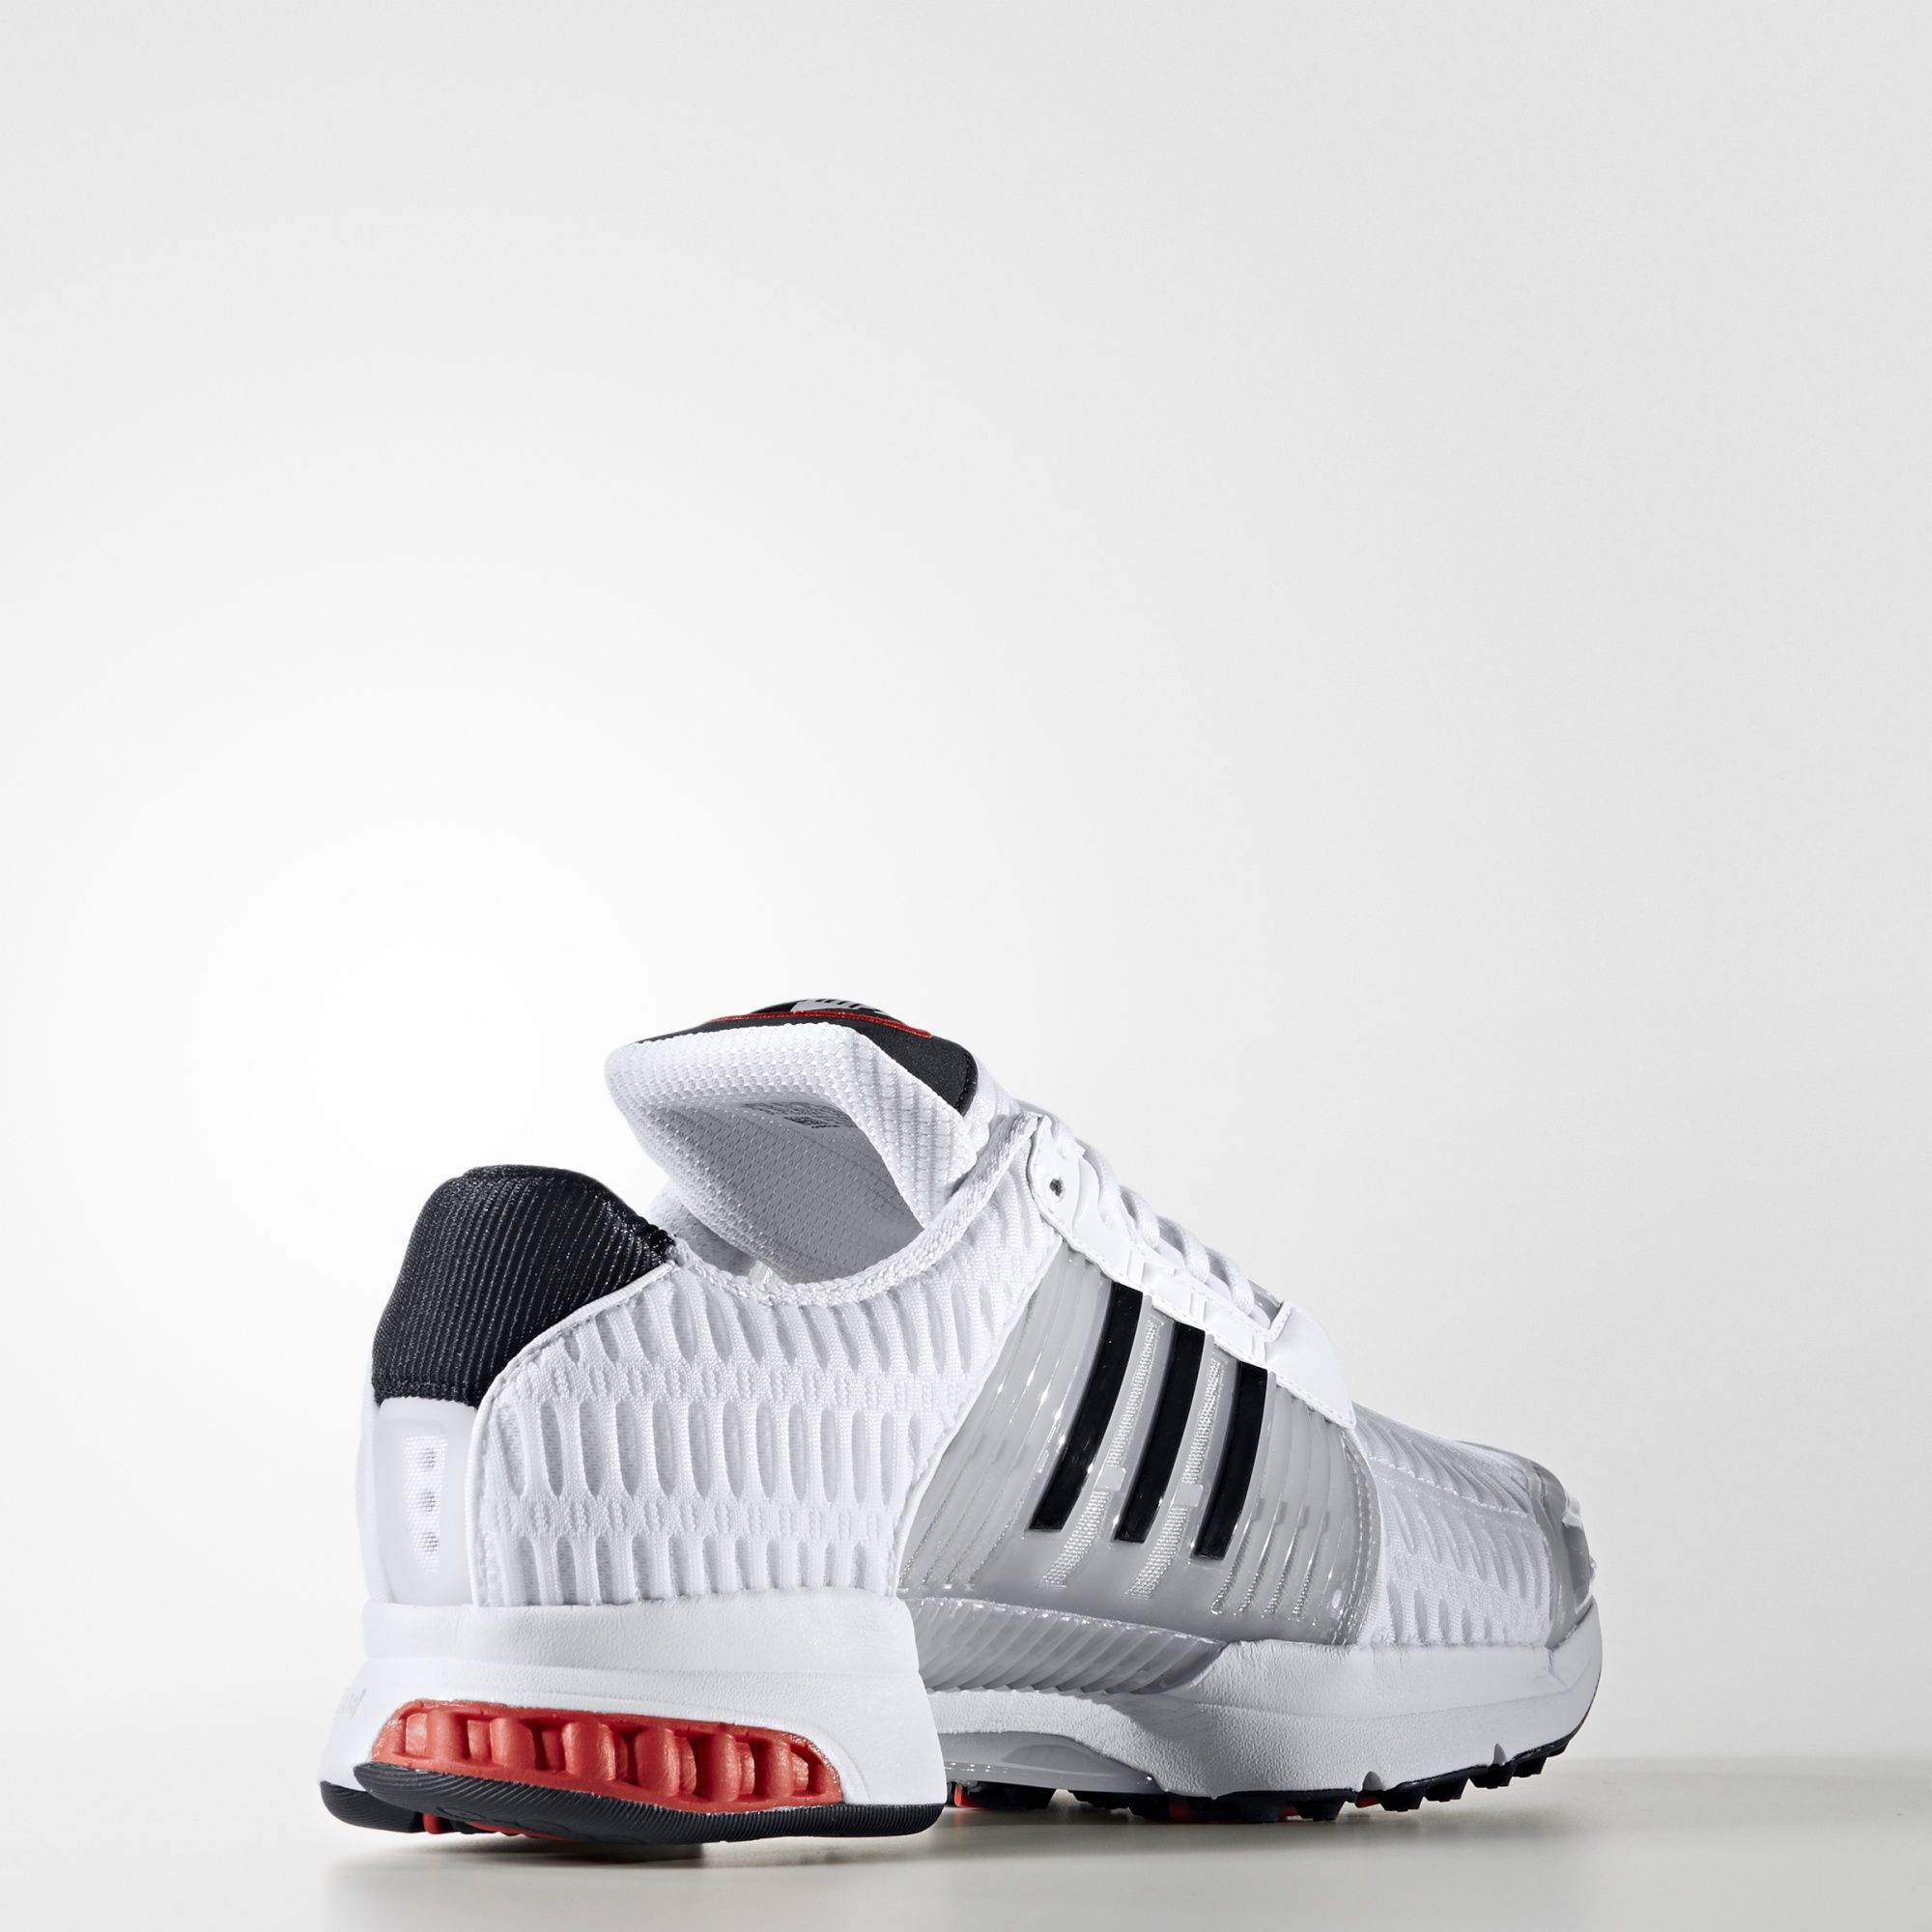 BY3008 adidas Climacool White Black 4